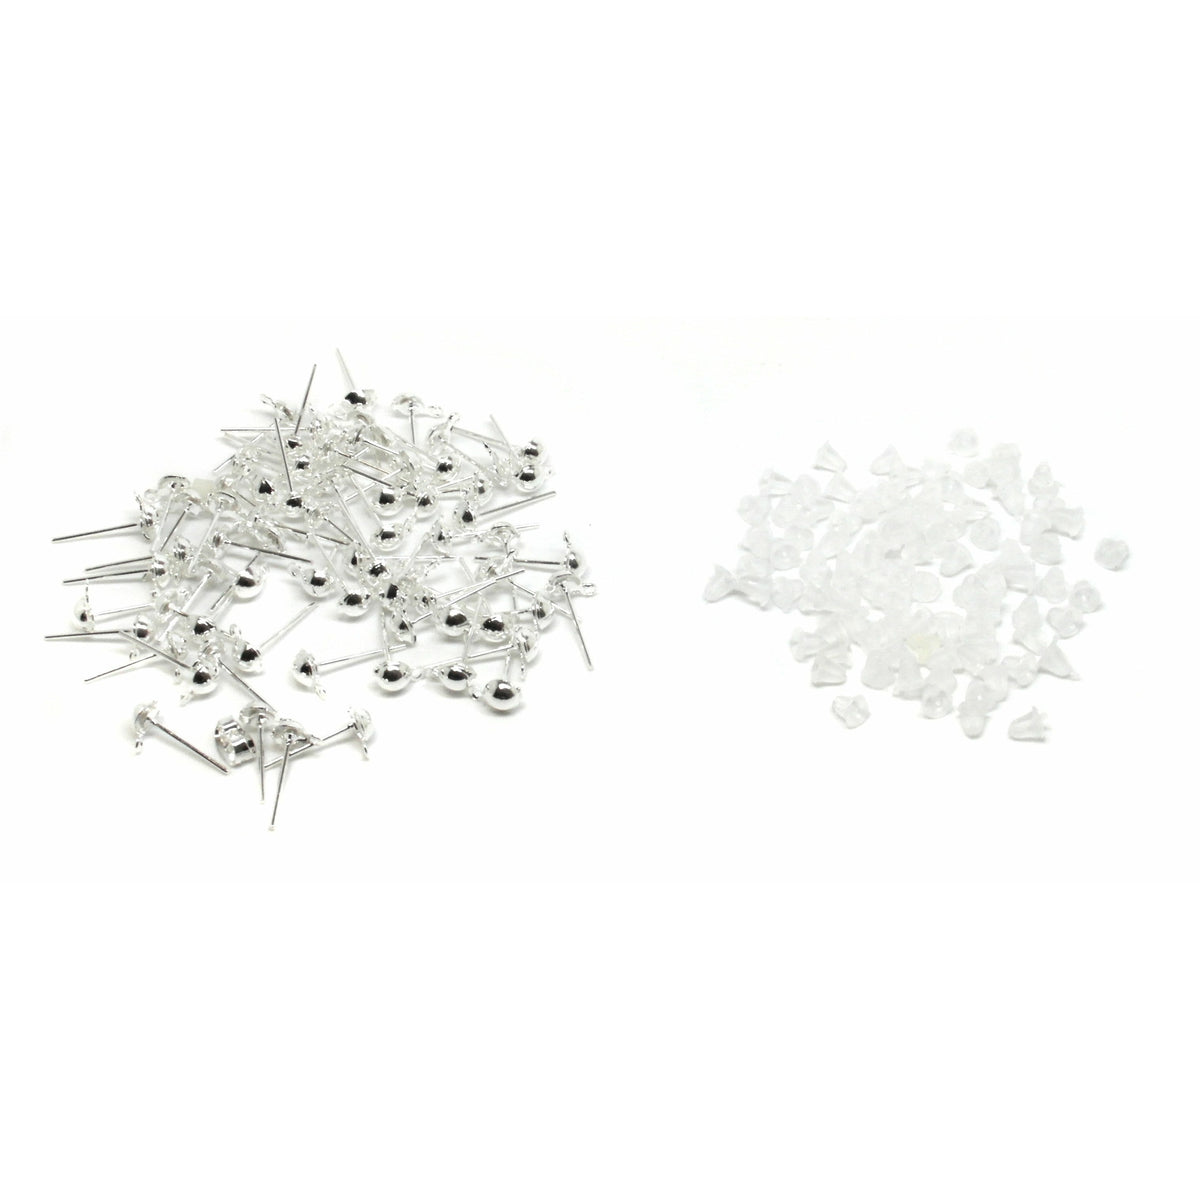 Stainless Steel Stud Earring Findings, with Sieve Base, Ear Nuts/Earring  Backs - China Earring Findings and Jewelry Making price